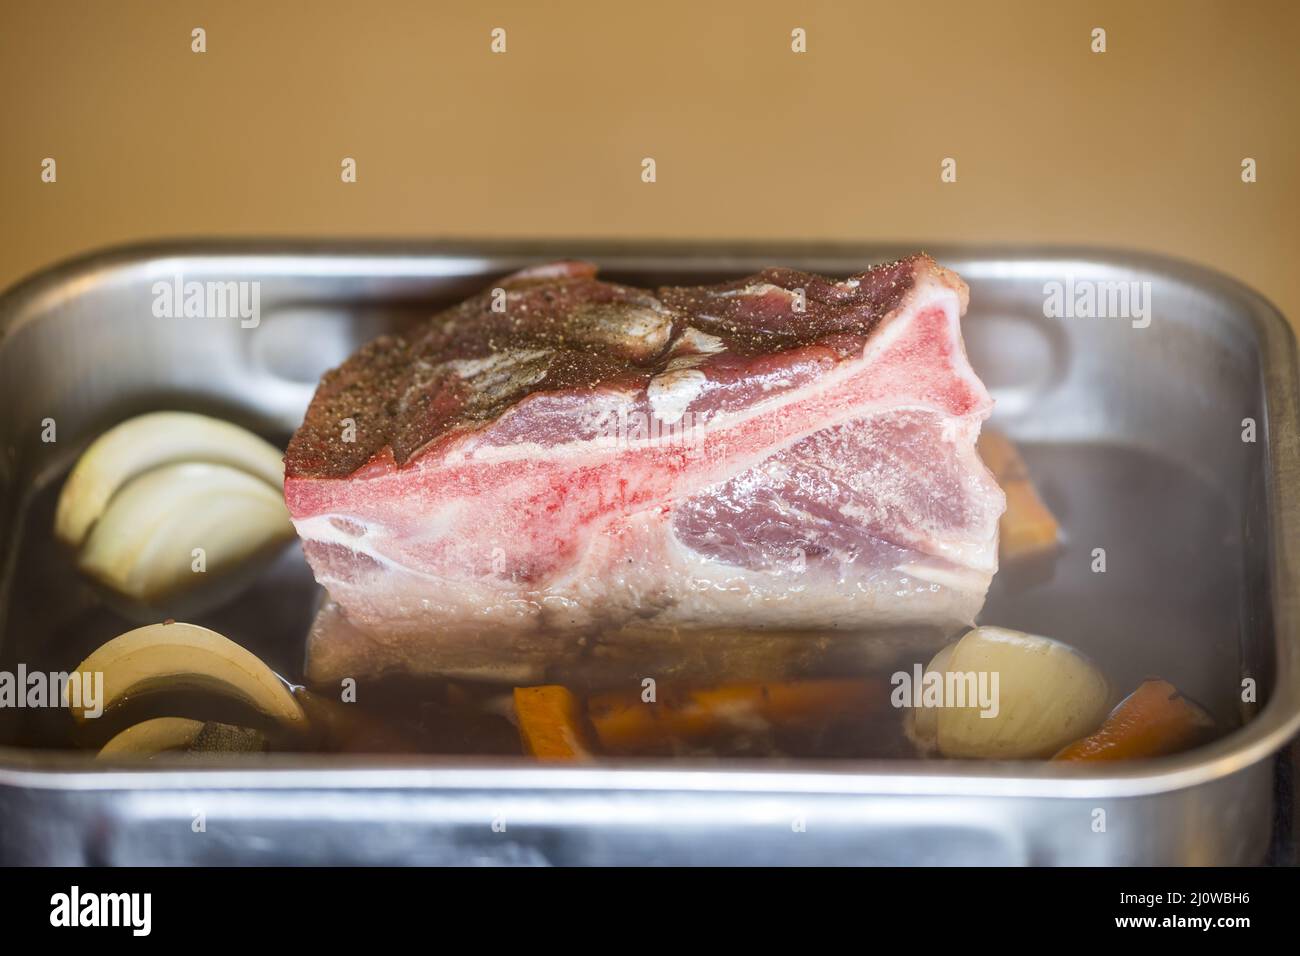 Raw pork shoulder in the baking dish Stock Photo